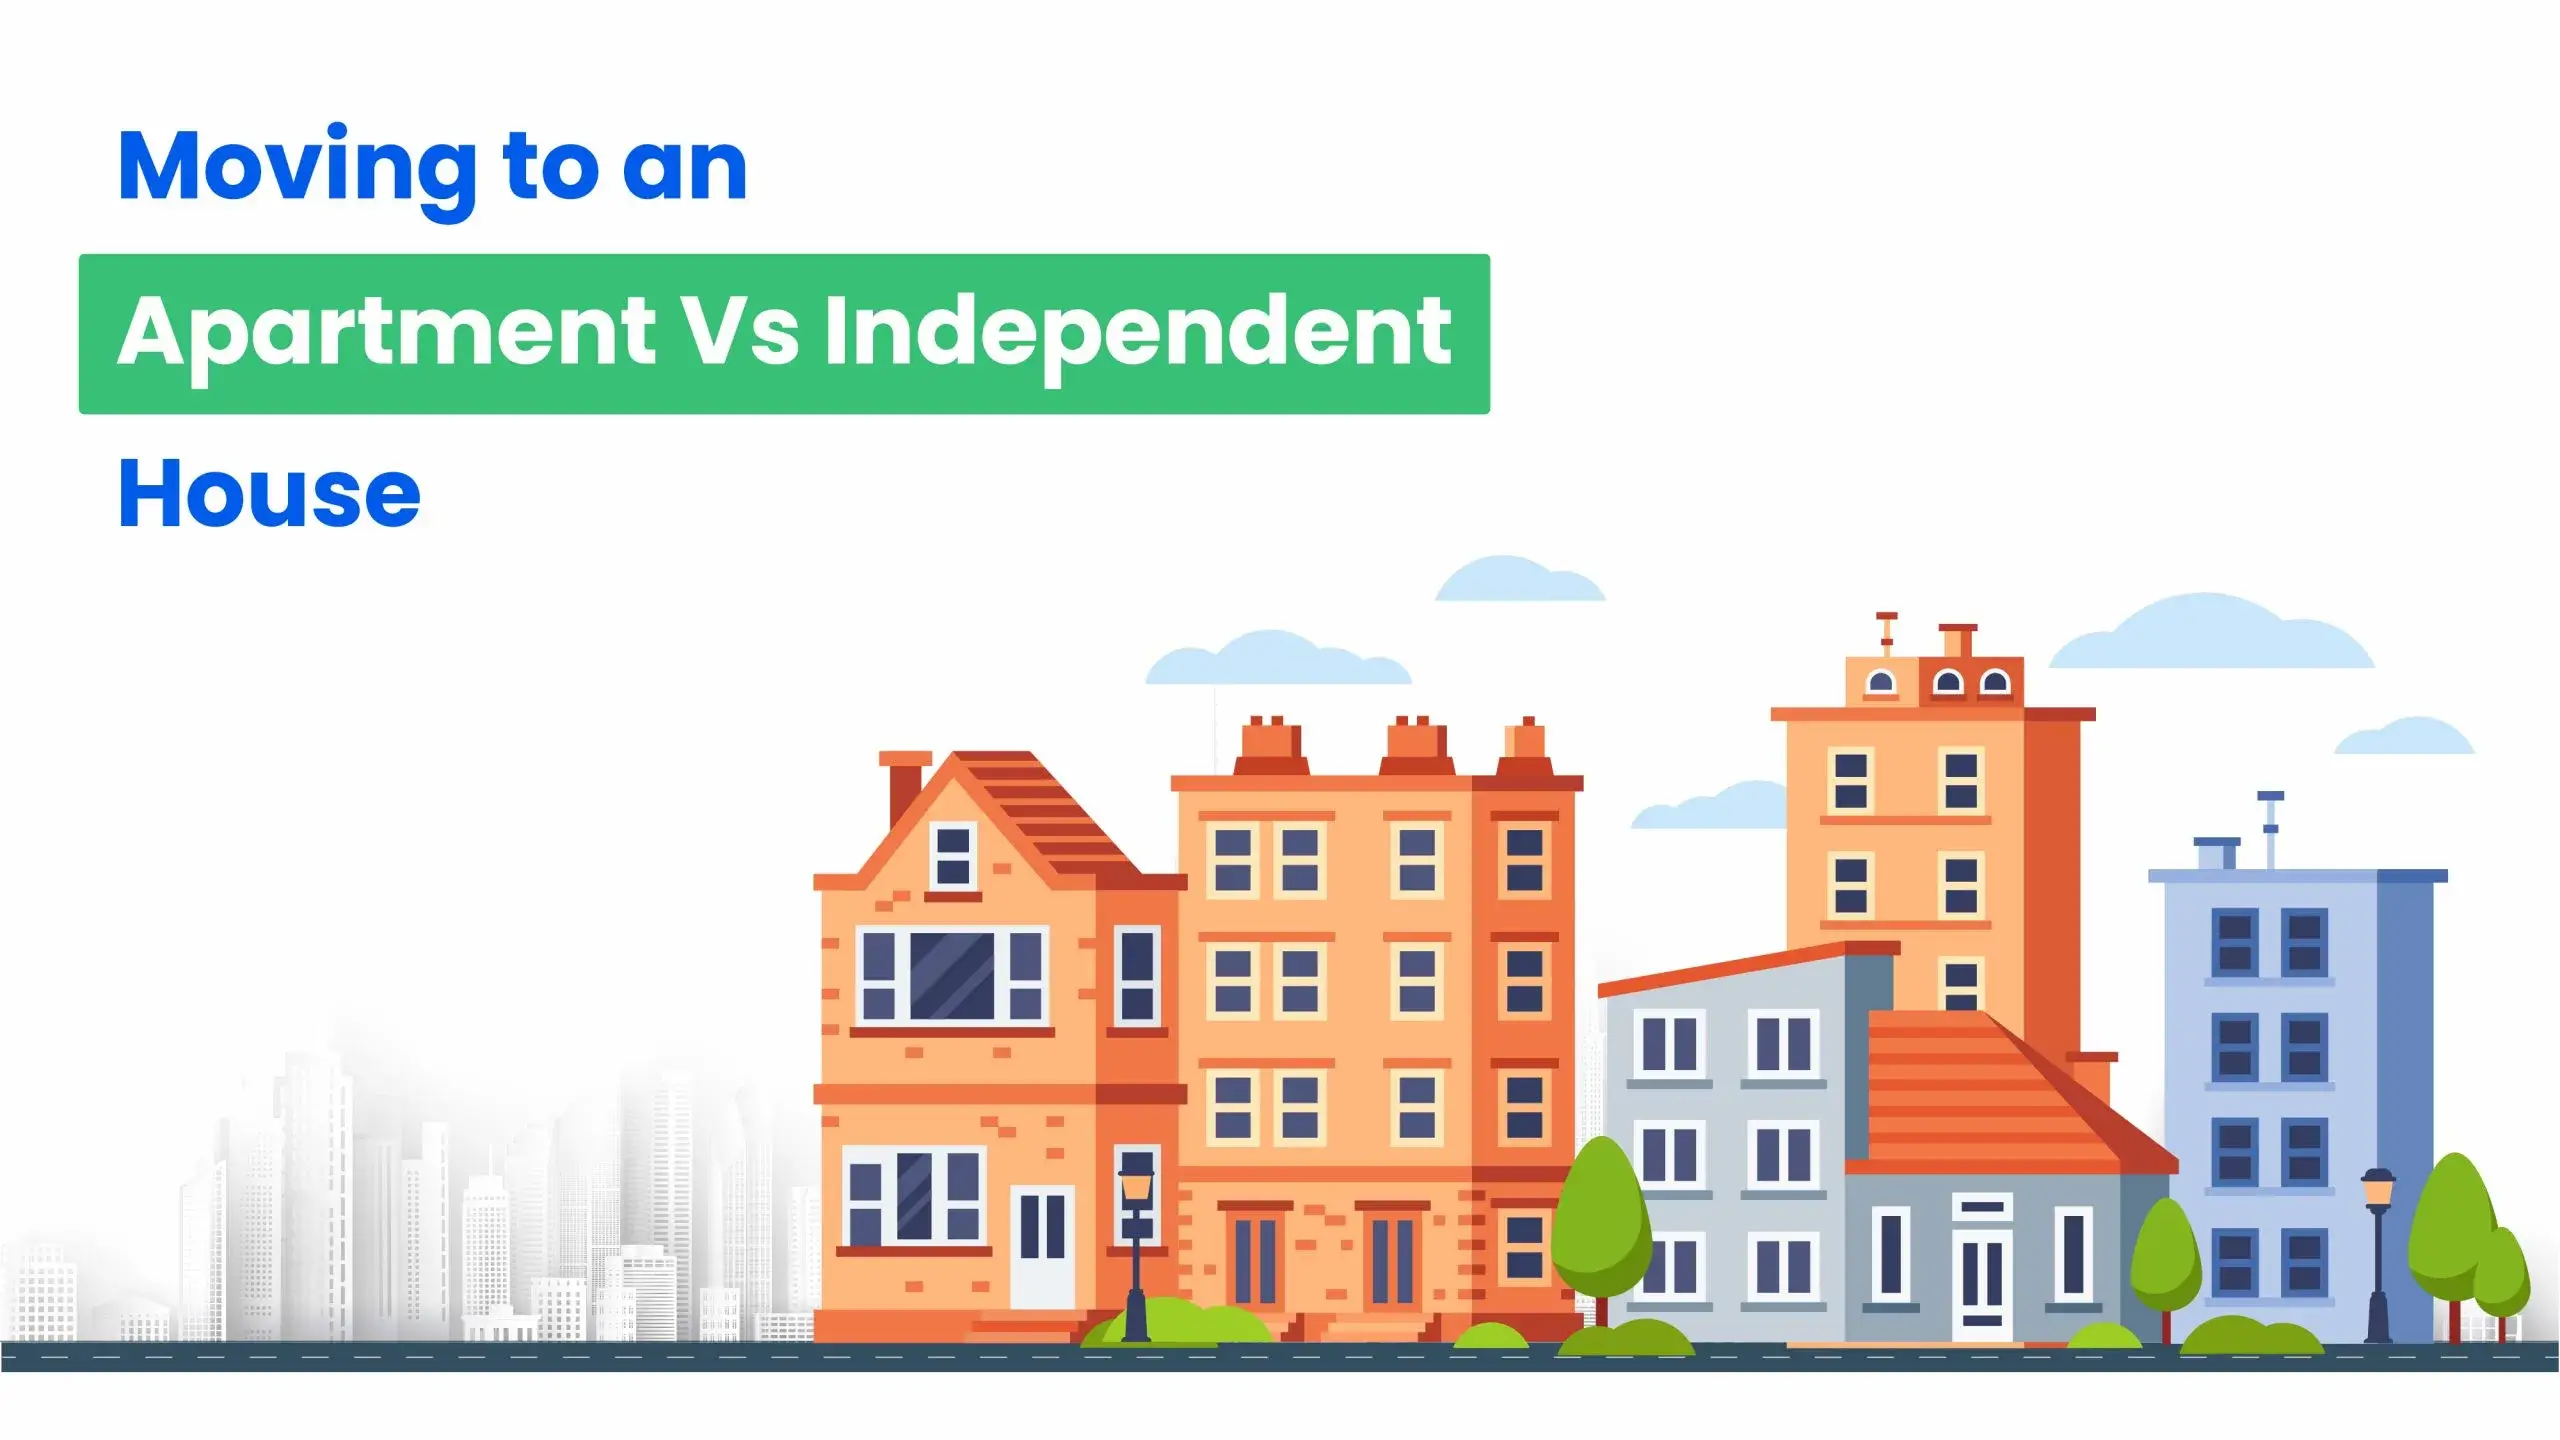 Moving to an Apartment Vs Independent House